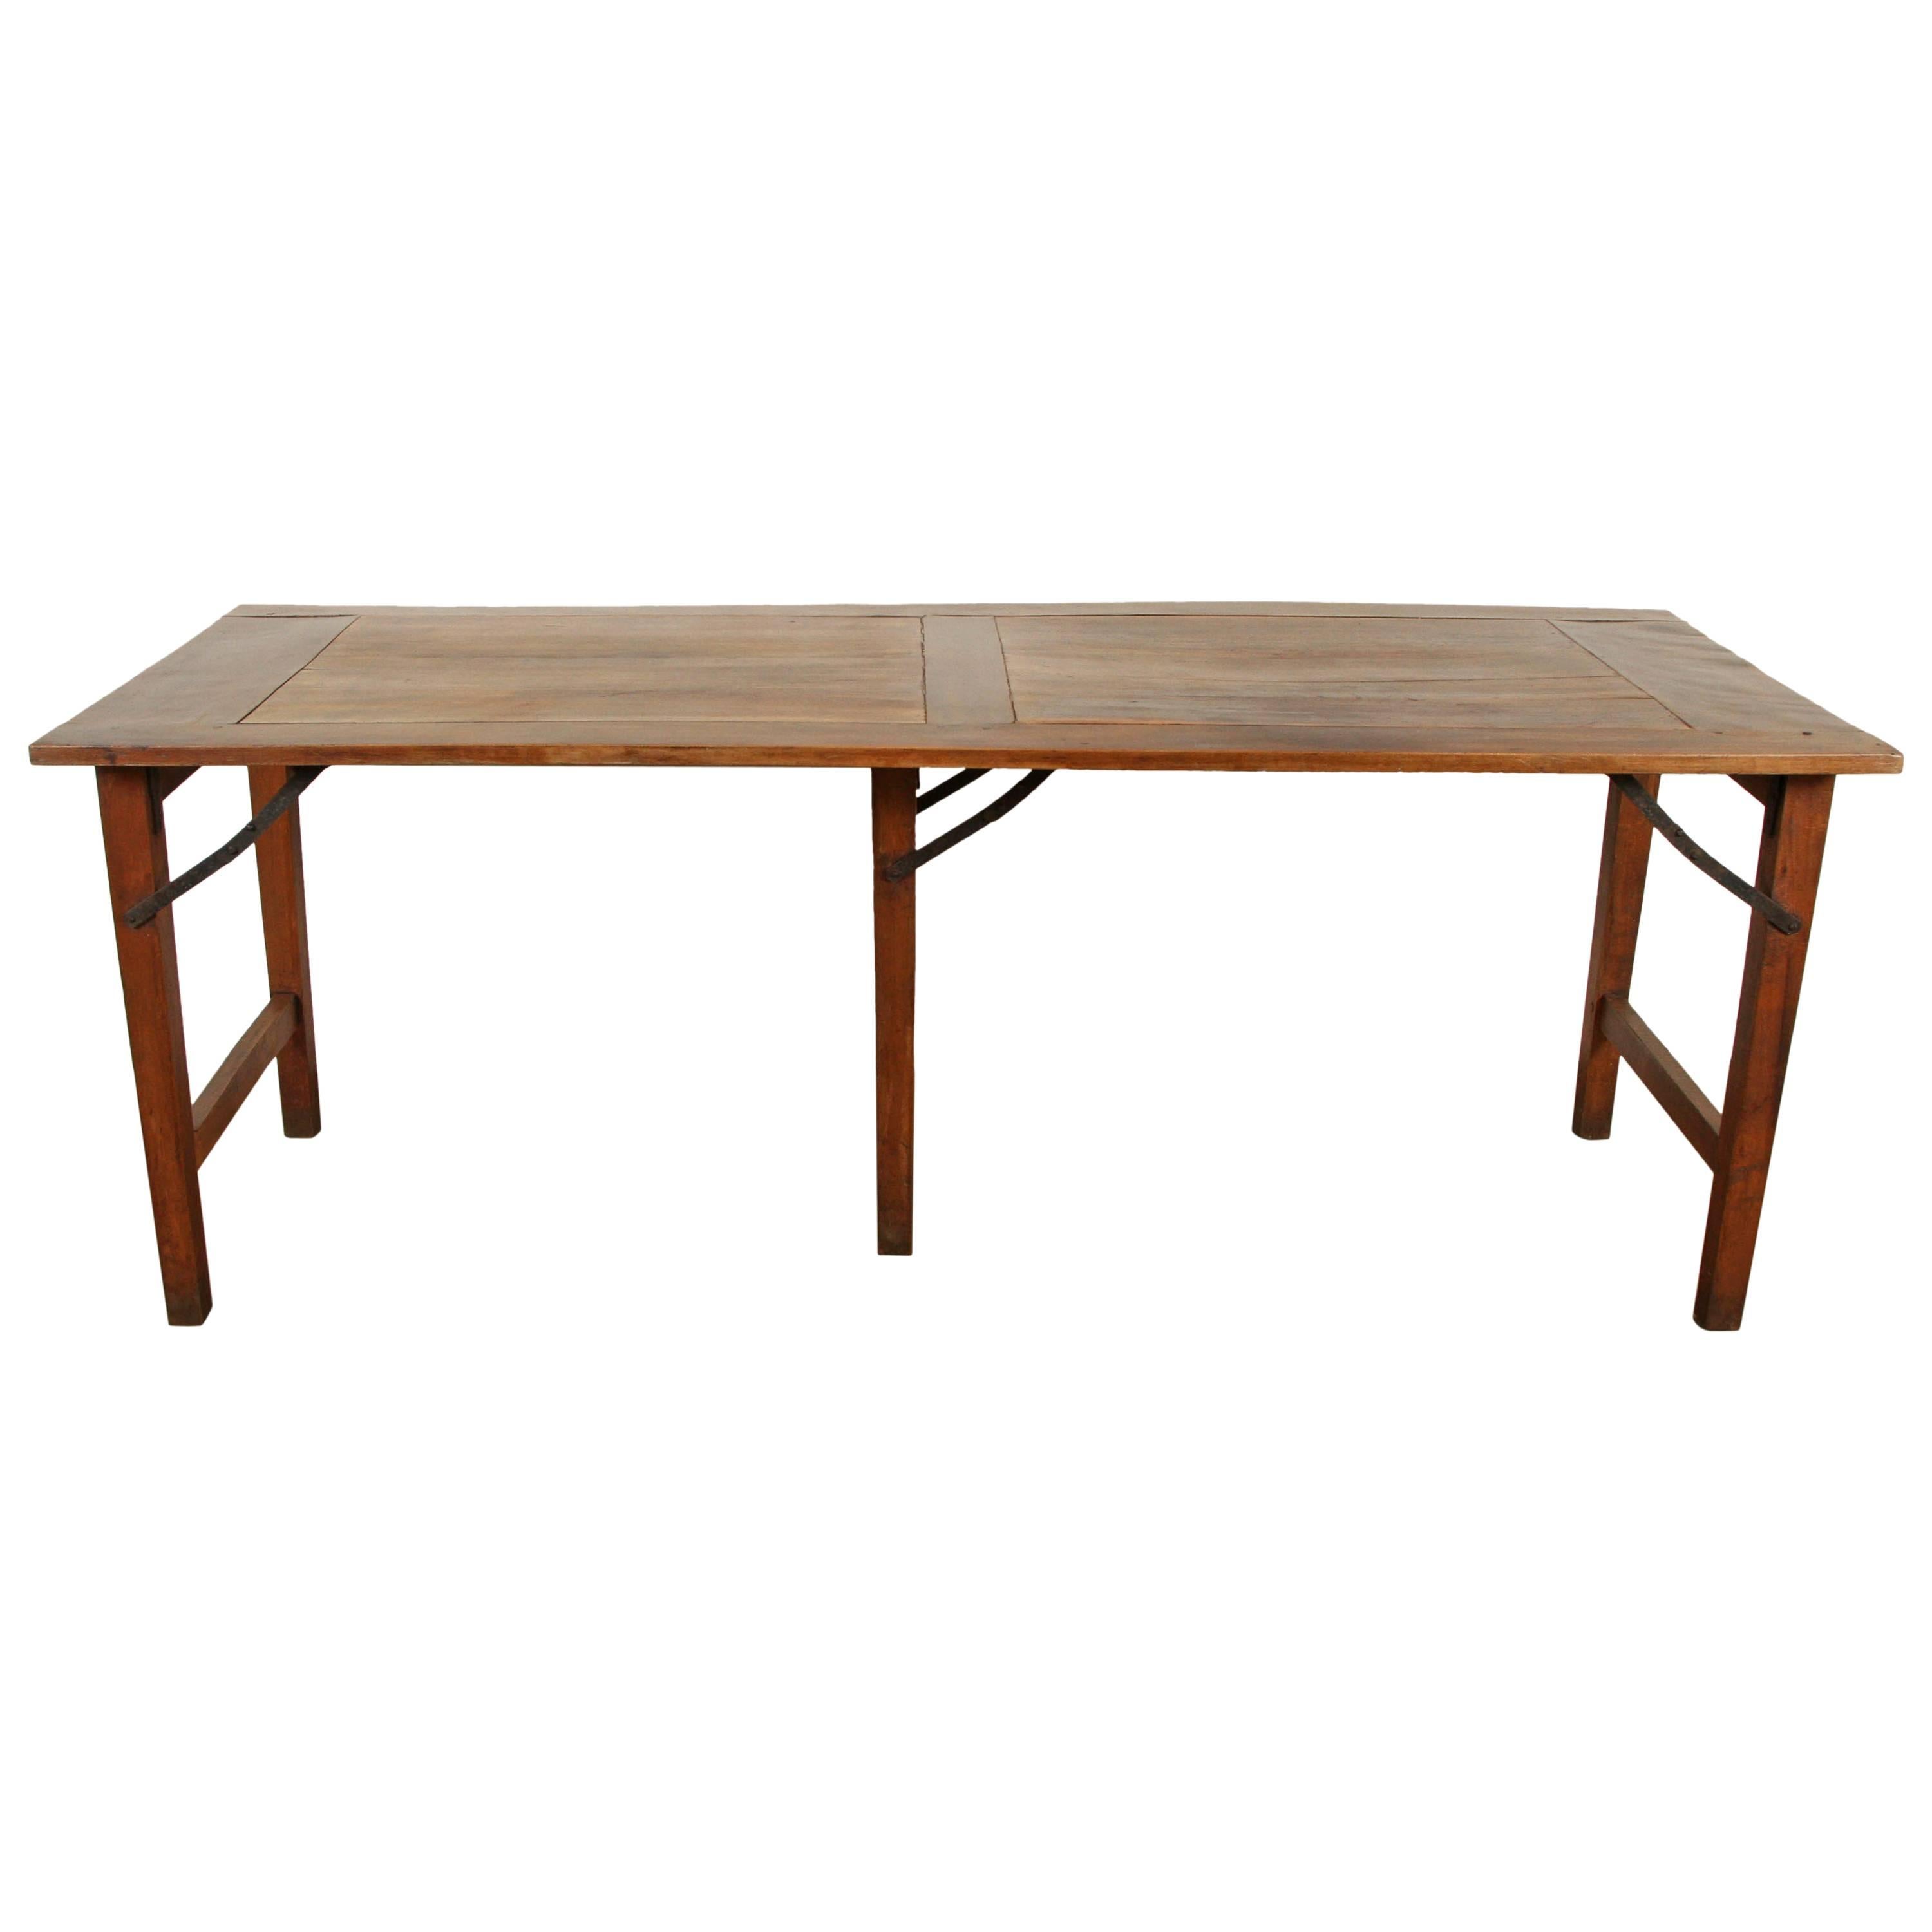 Late 19th Century French Walnut Table with Folding Legs For Sale